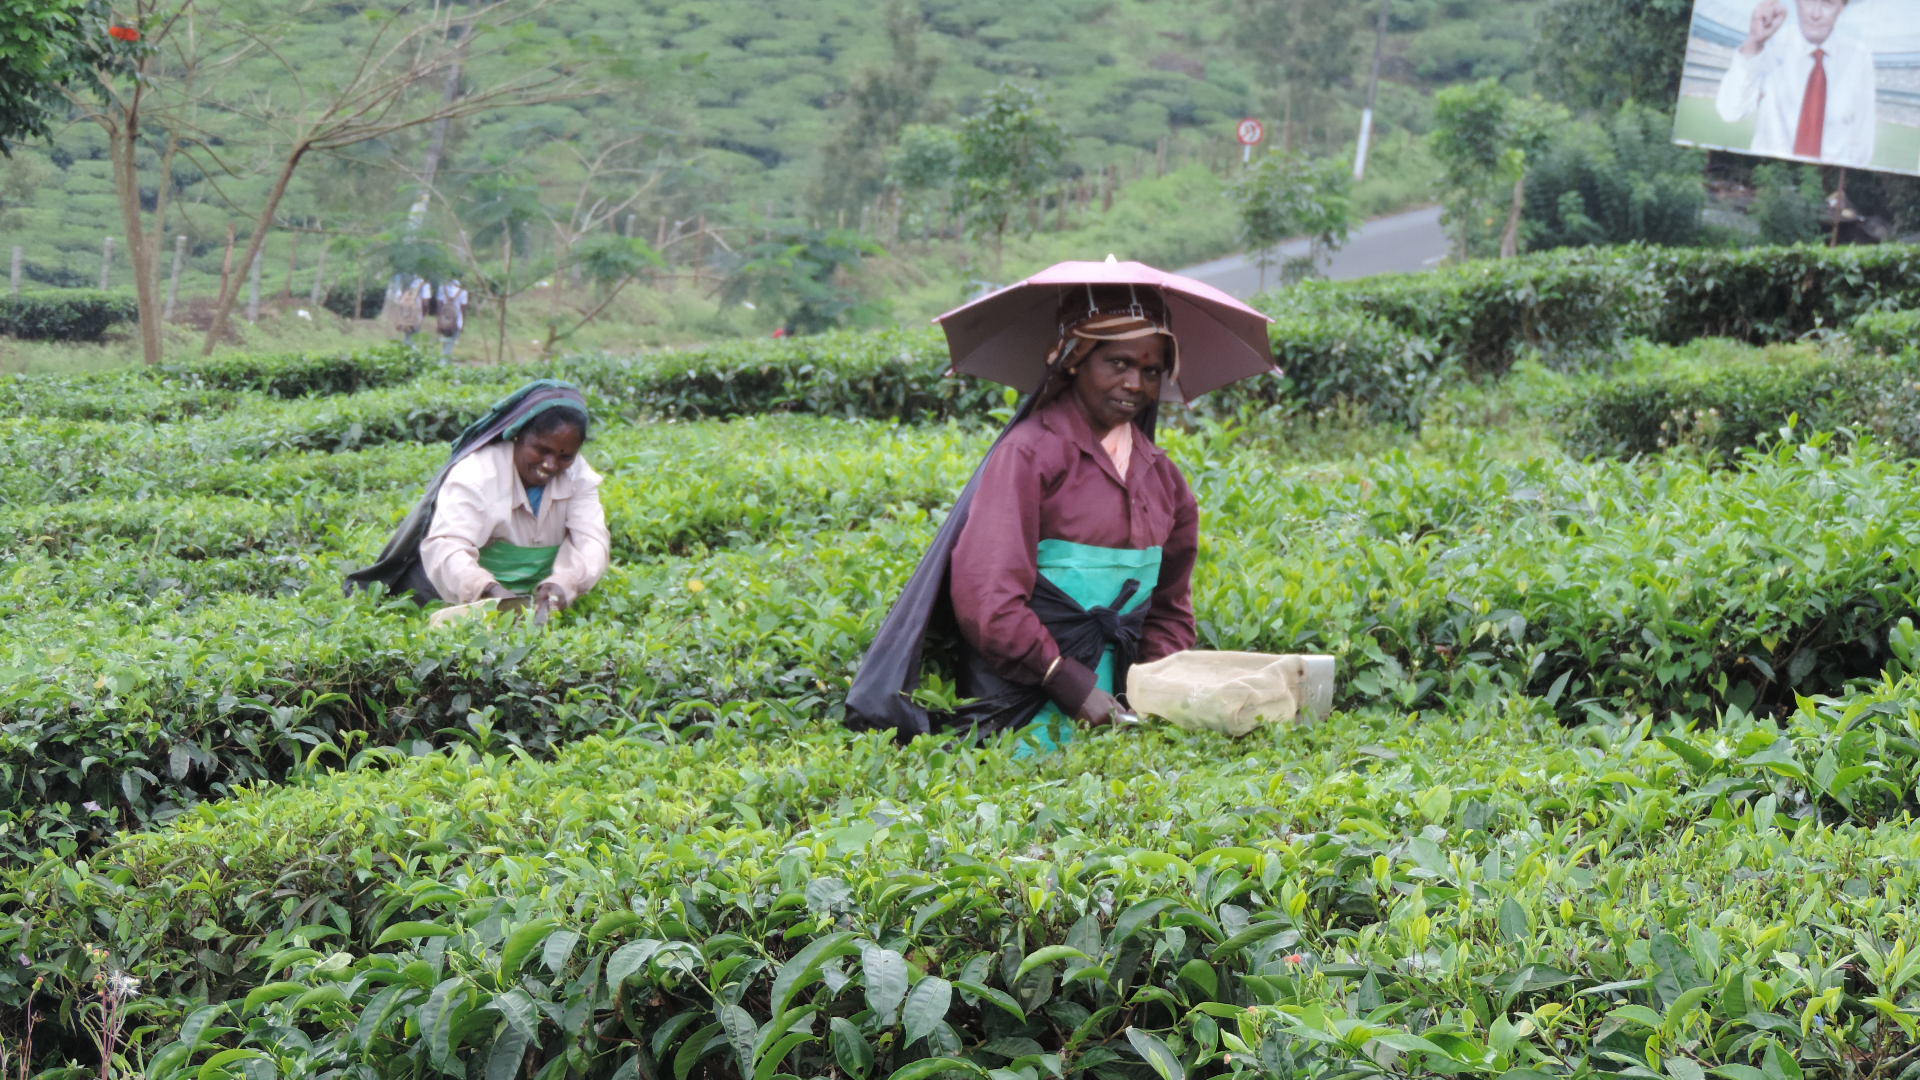 picking tea with shears with integral basket by lady with umbrella hat